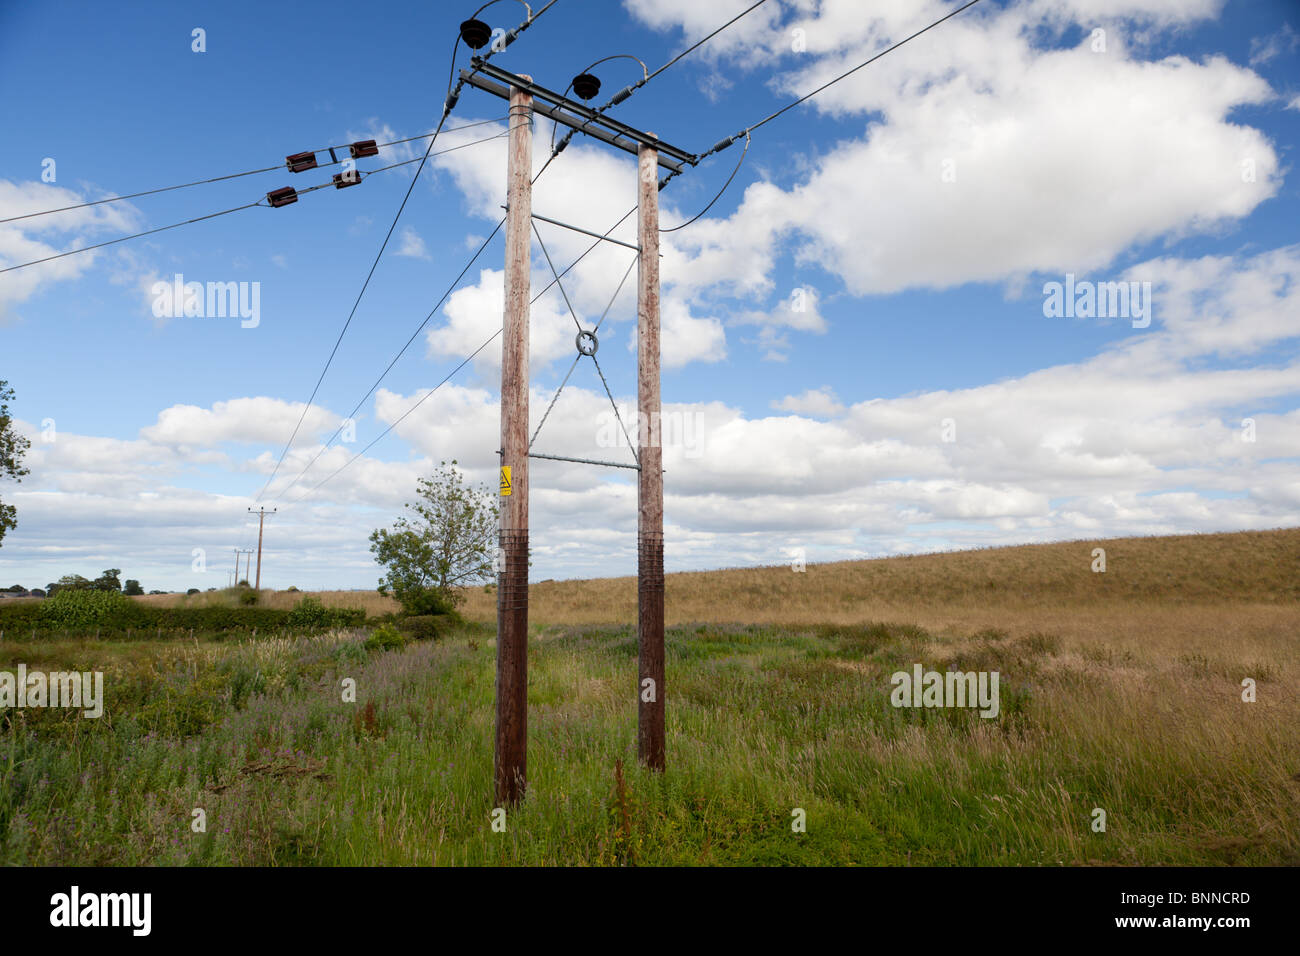 A wooden telegraph pole in a farmers field Stock Photo